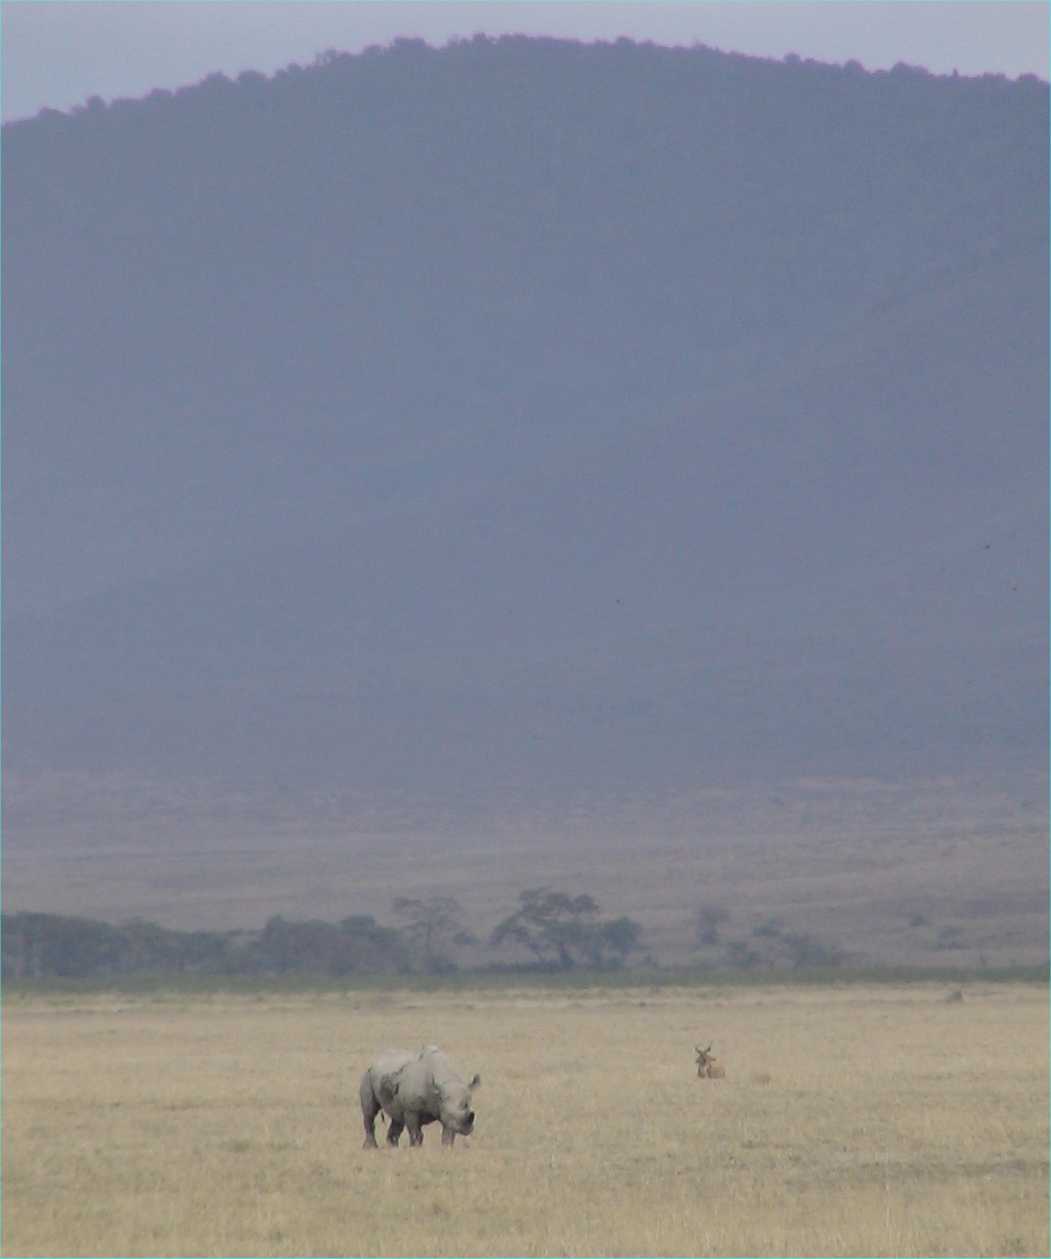 Black rhino.  Note the rim of the crater in the background.  Photo by FG, Dec. 2005.